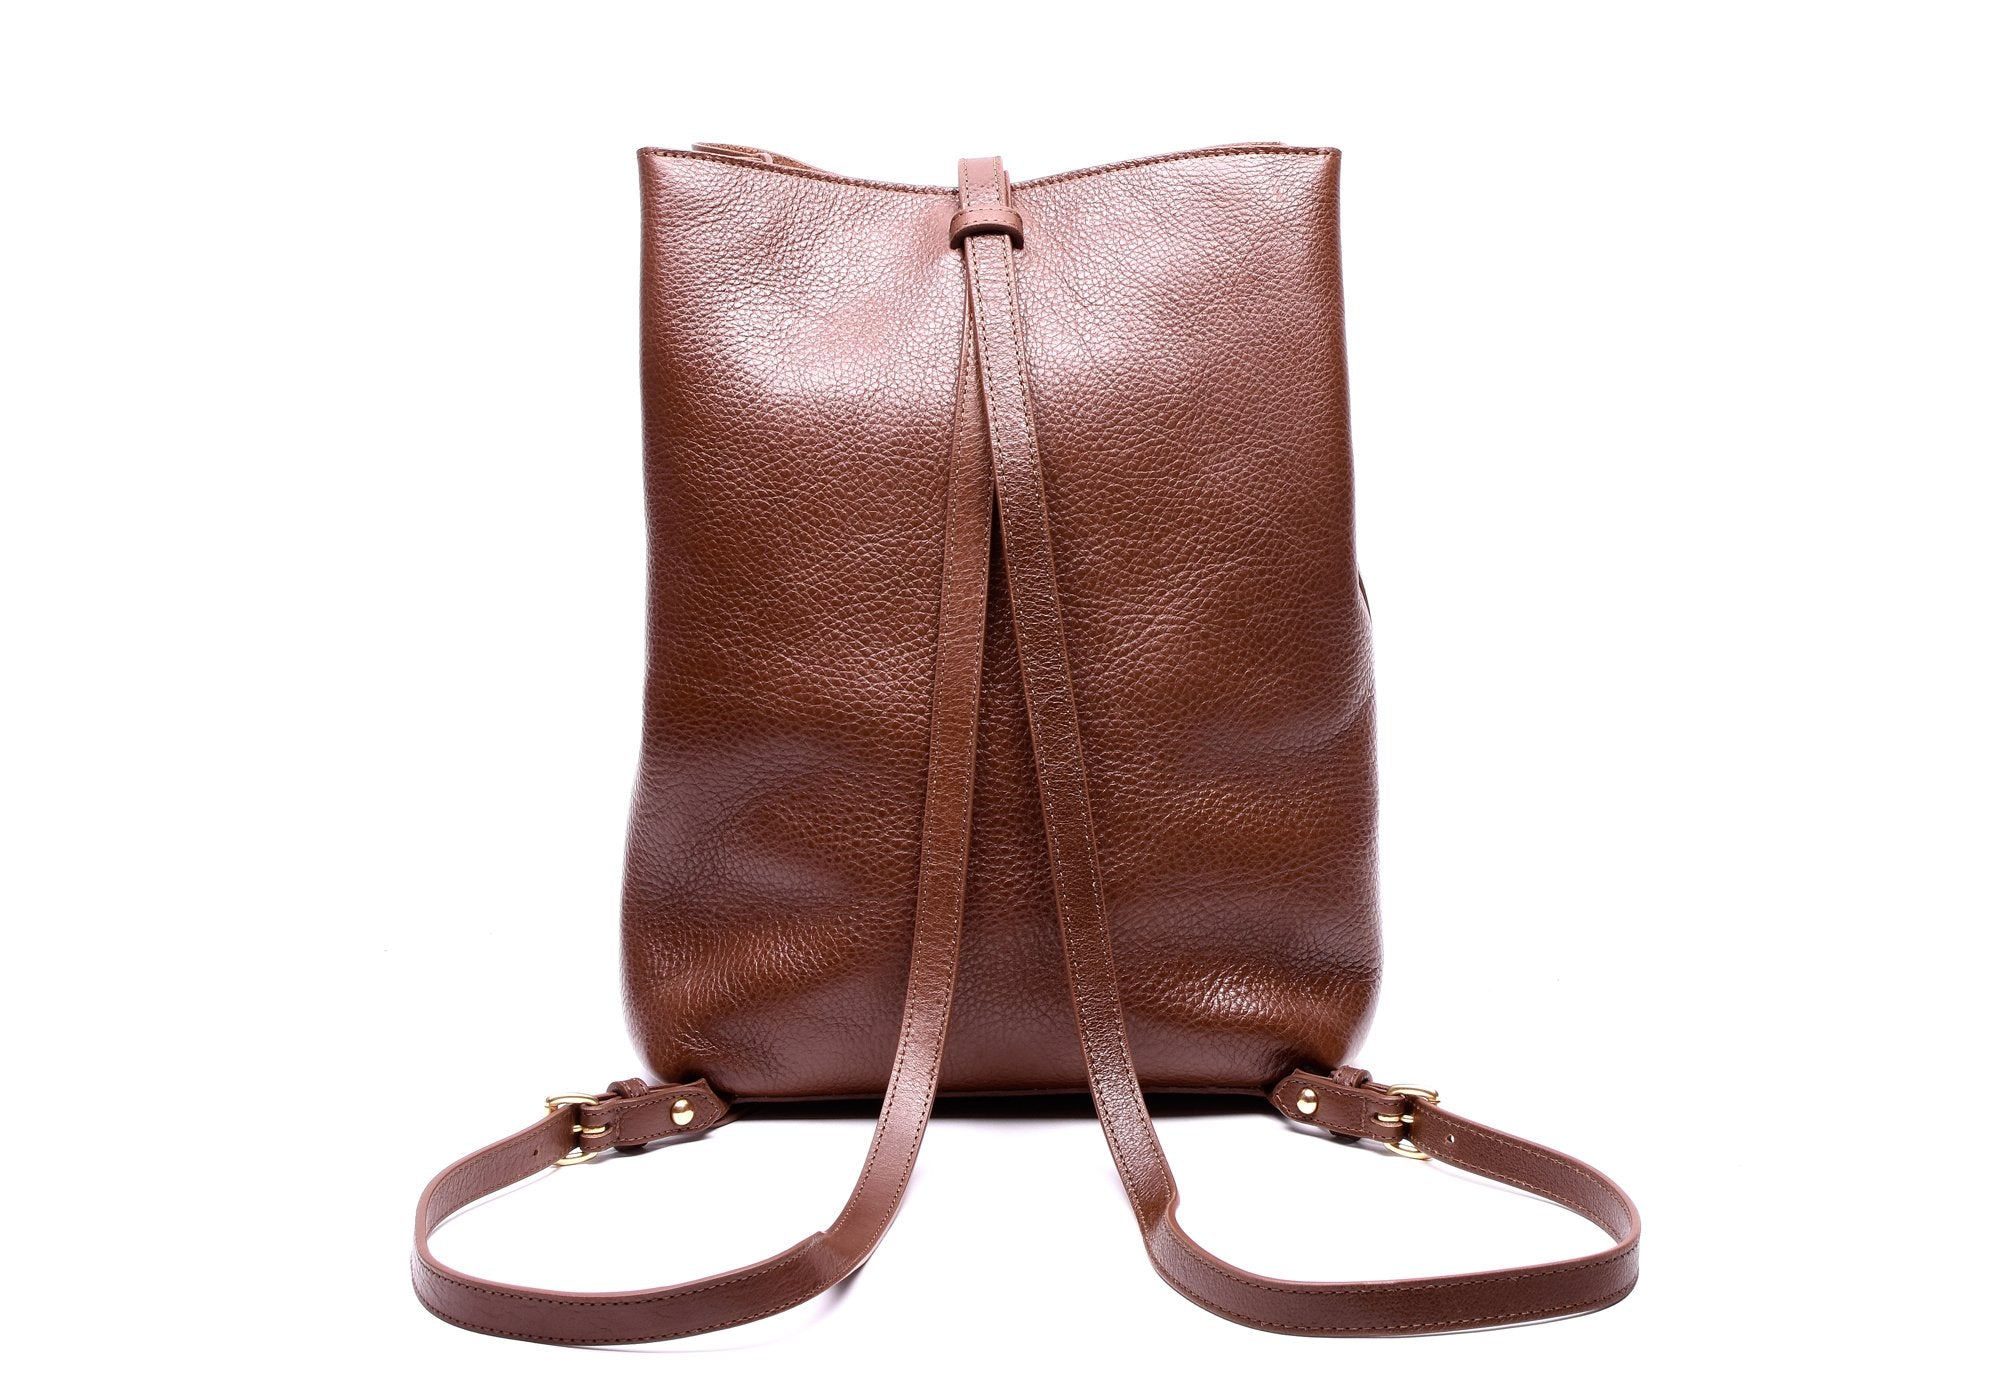 The Sling Backpack - Handmade Women's Leather Backpack and Bucket Bag ...